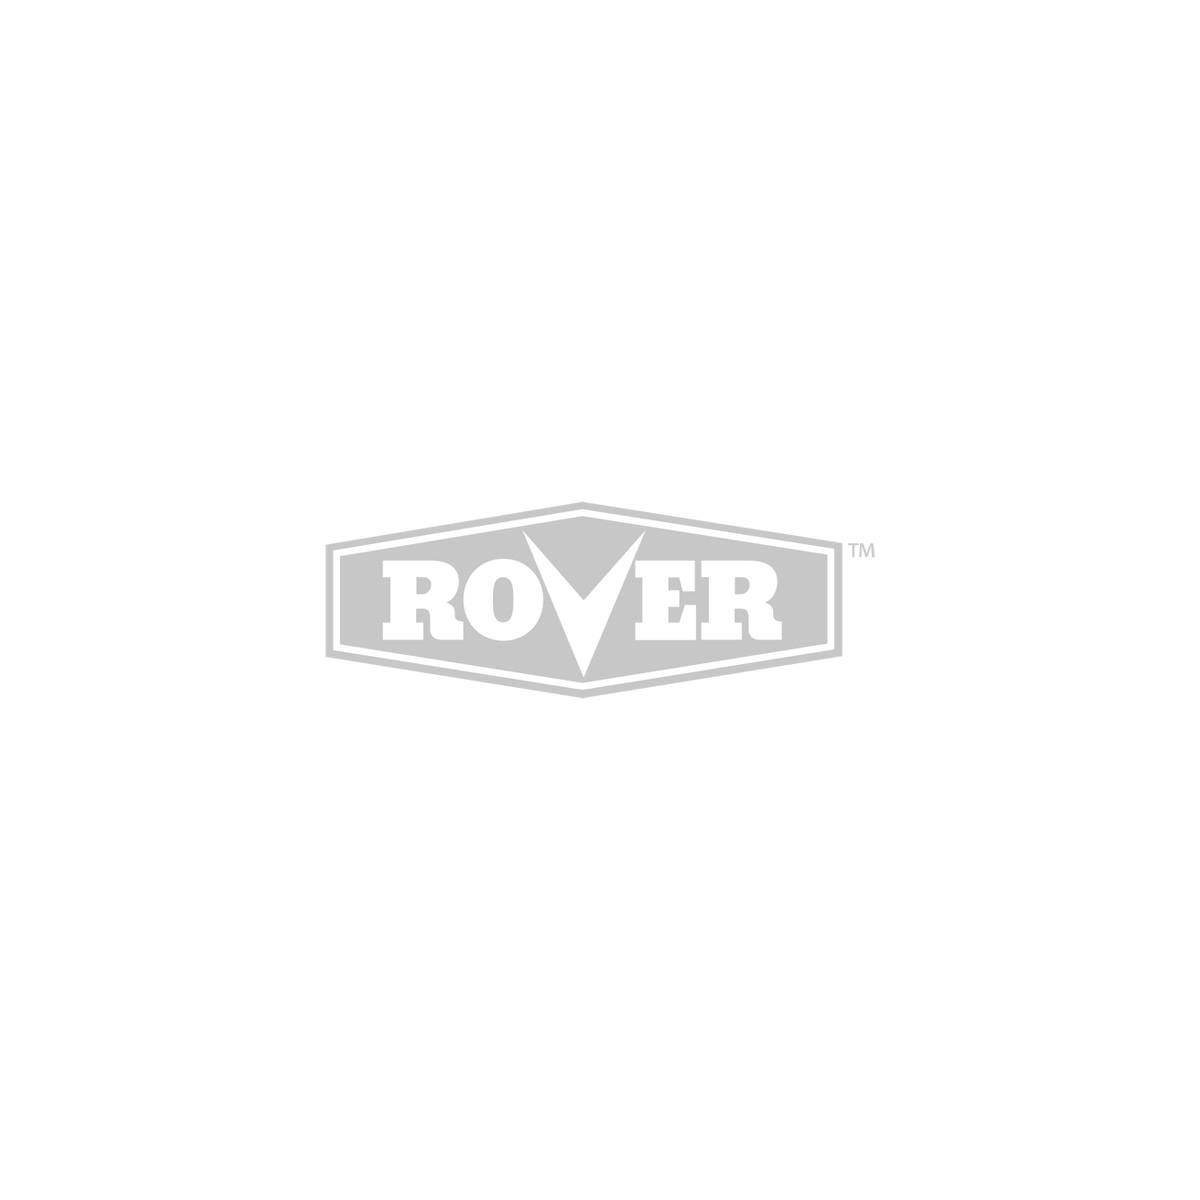 Rover's January Sale